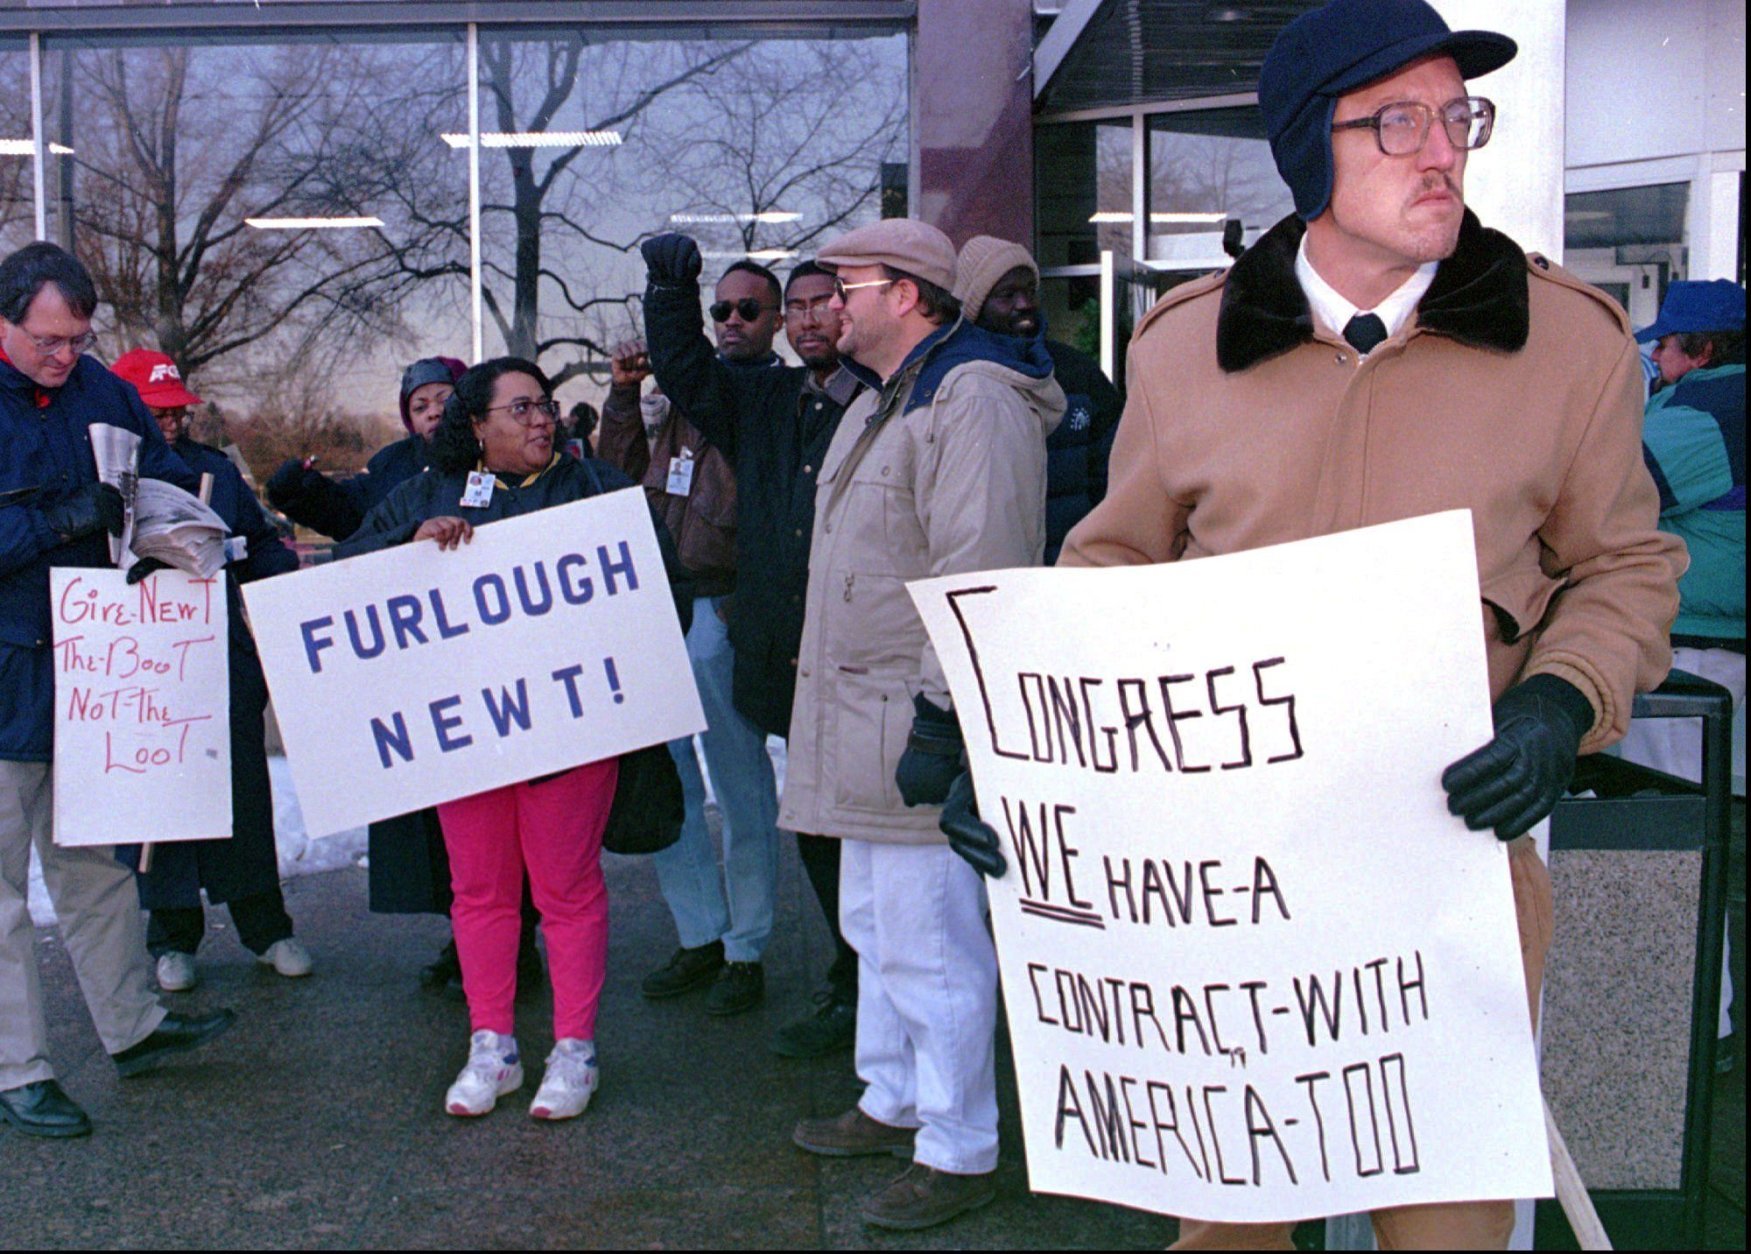 Dave Glass, of Baltimore, a federal government computer assistant, right, and about 100 other furloughed Social Security Administration workers gather at the Arthur J. Altmeyer Building Tuesday, Dec. 26, 1995 in Woodlawn, Md., to protest the temporary government shutdown. (AP Photo/Gary Sussman)